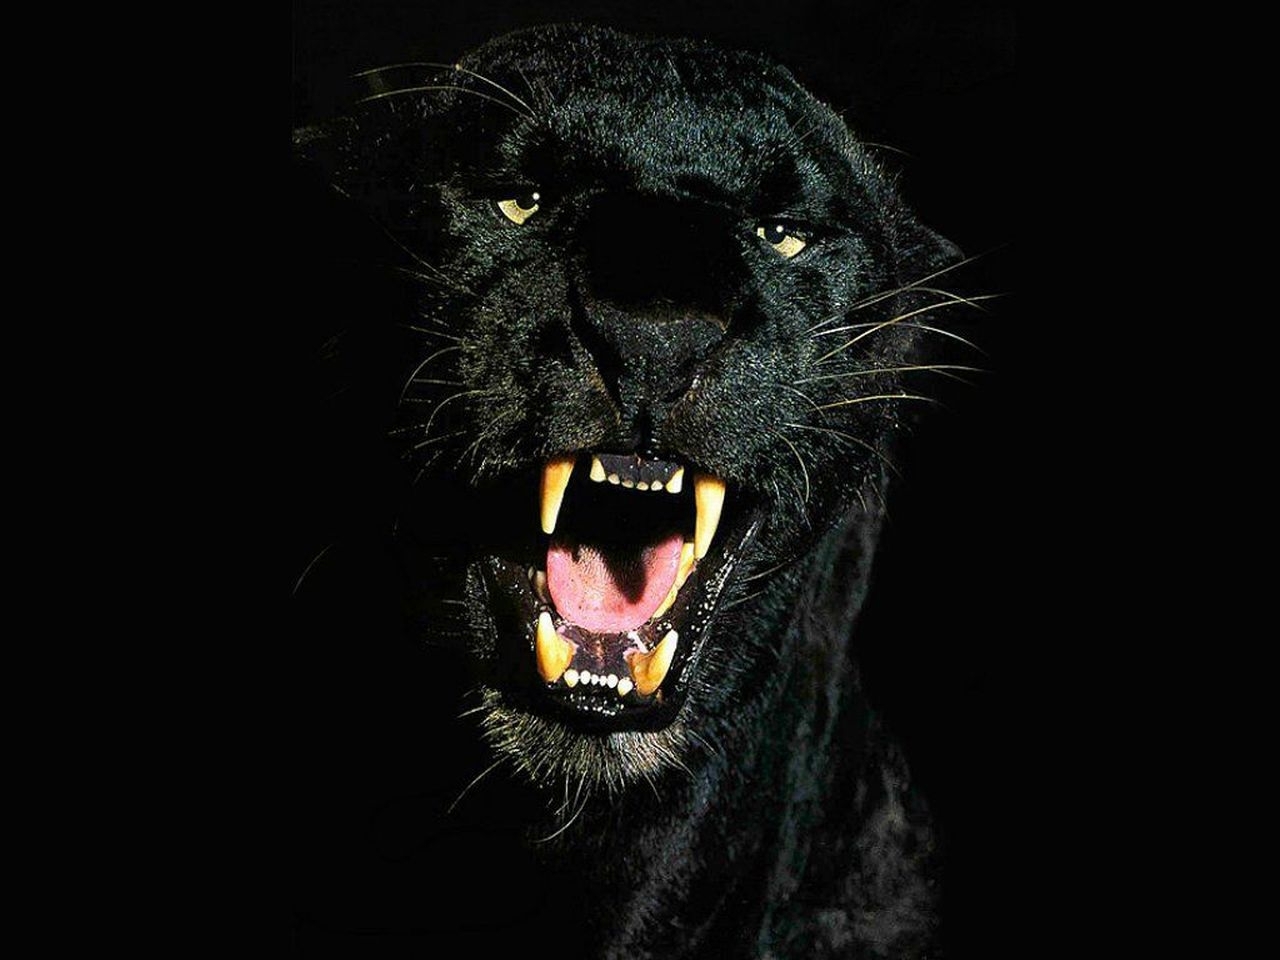 28445 download wallpaper animals, panthers, black screensavers and pictures for free